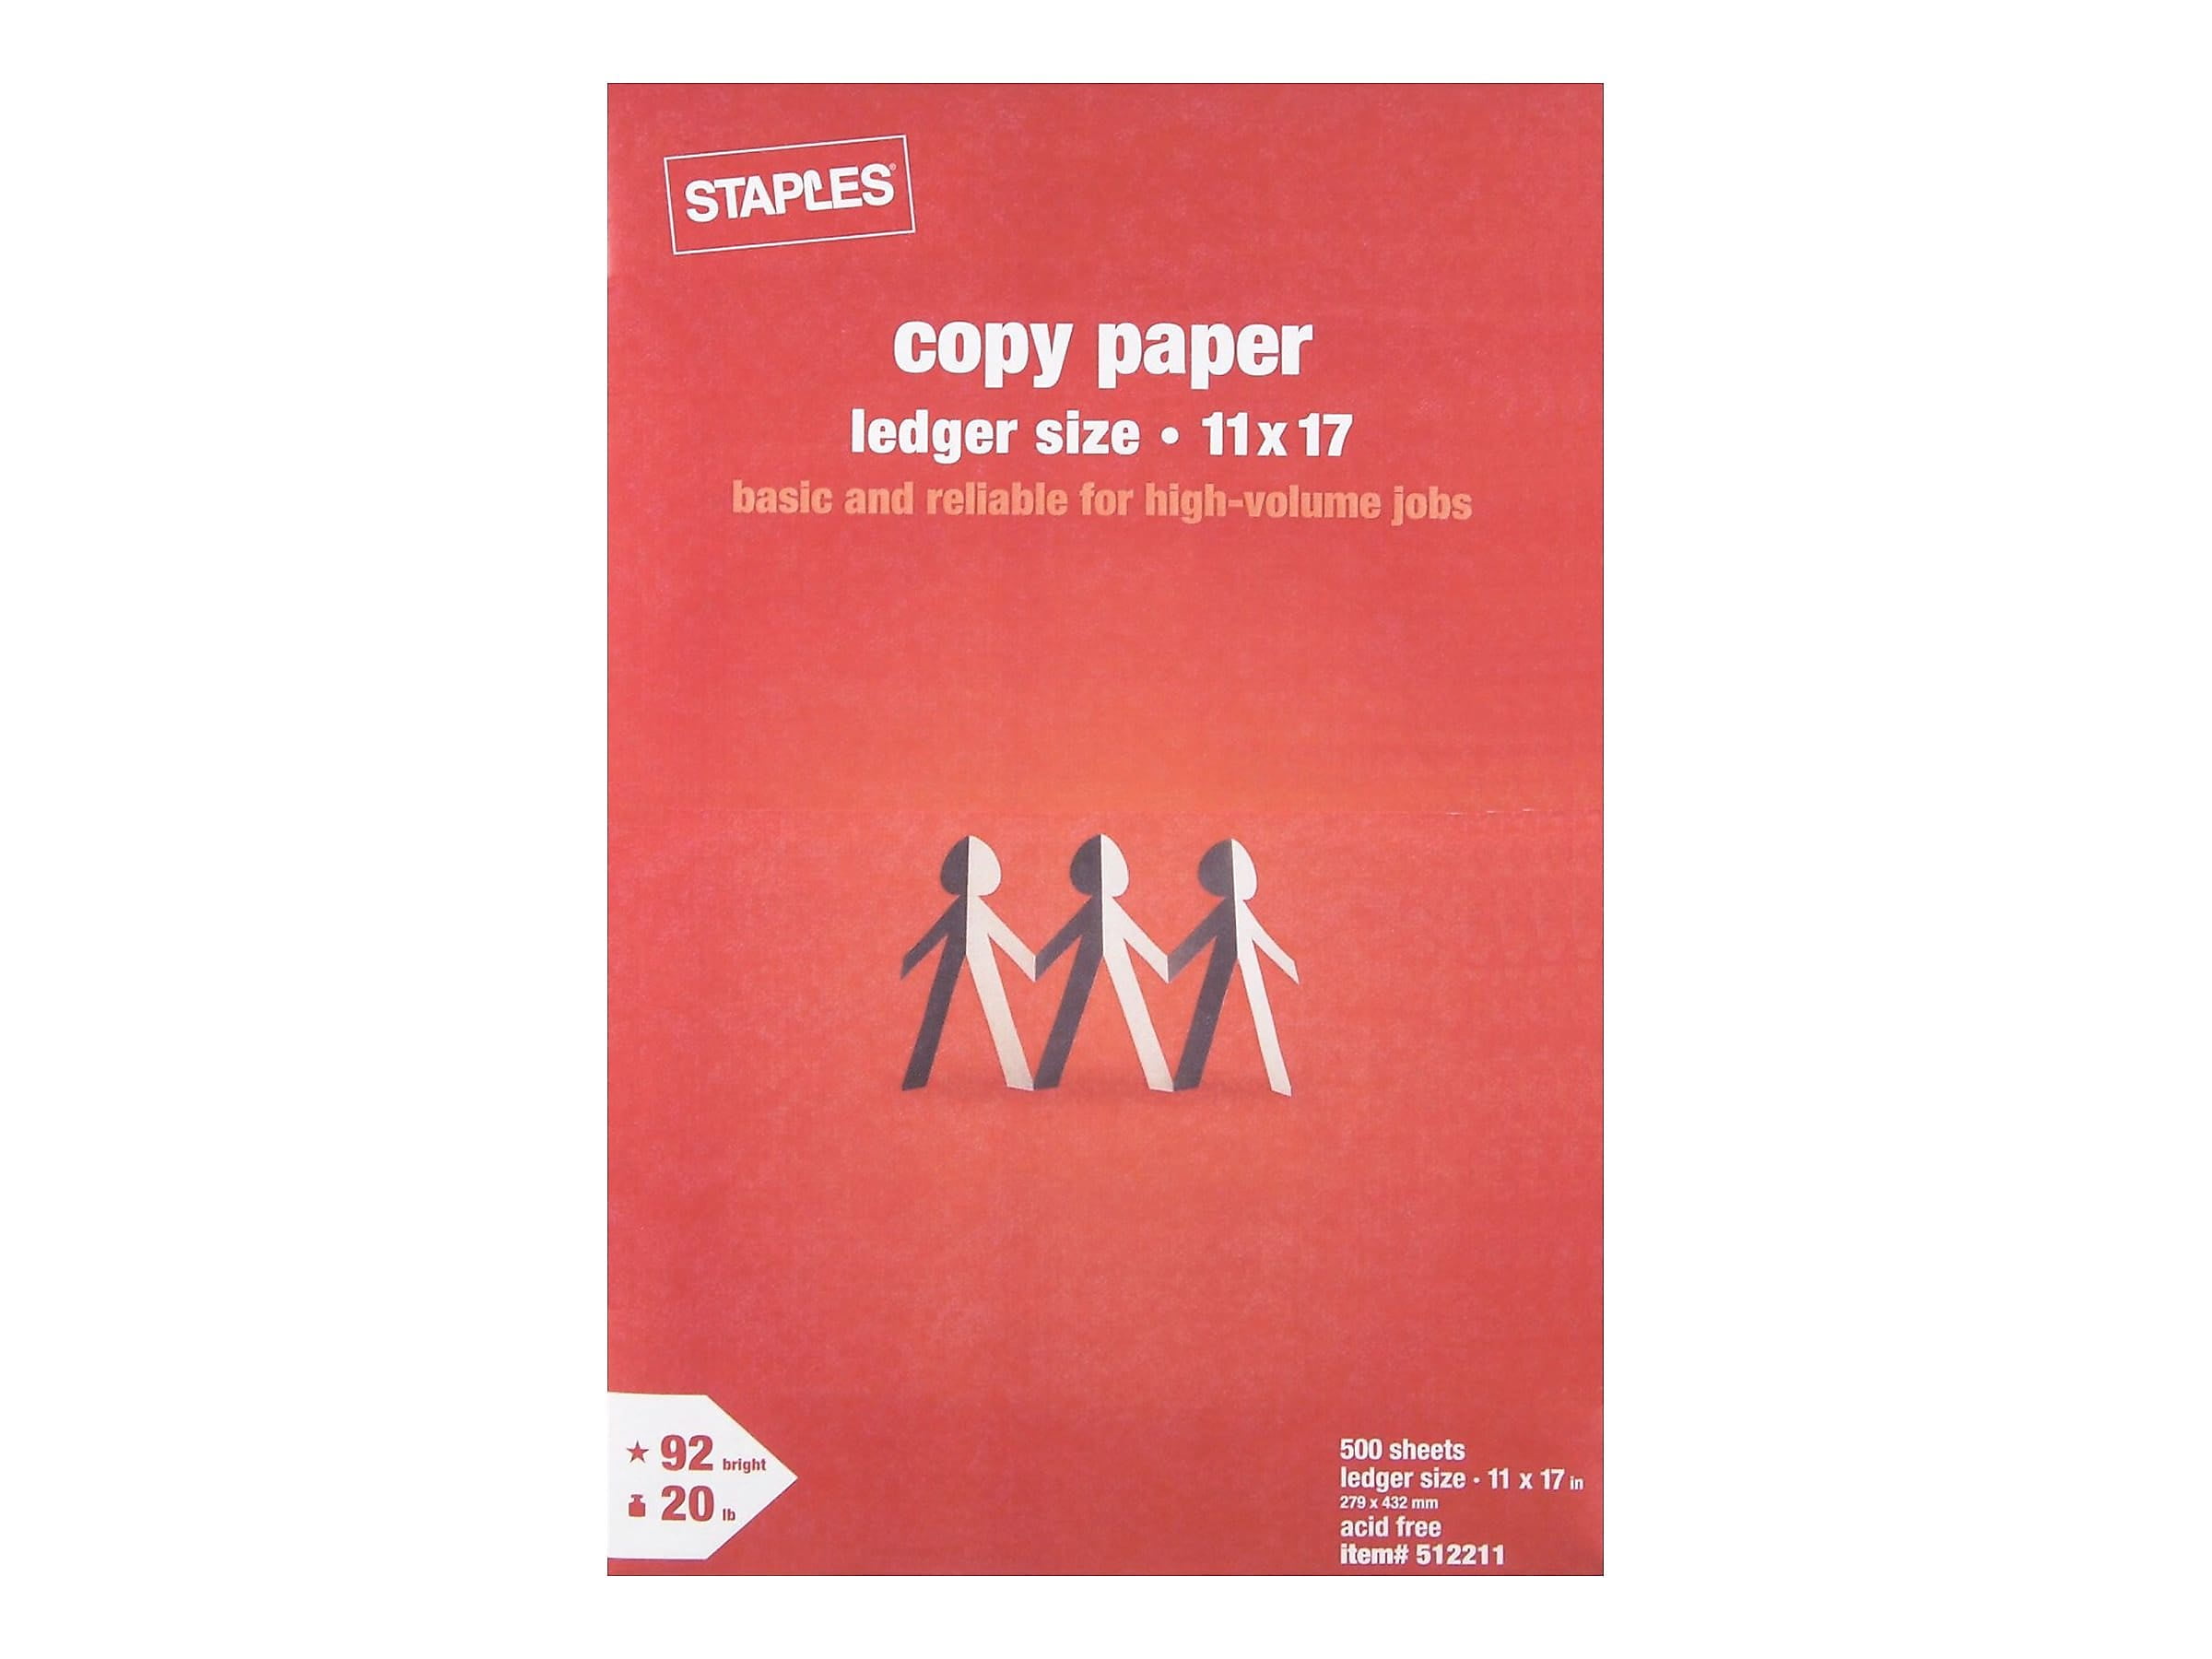  Exact-26721 Color Copy Paper, 8-1/2 x 11 Inches, 20 lbs, Bright  Orange, Pack of 500 - 87300 : Office Products